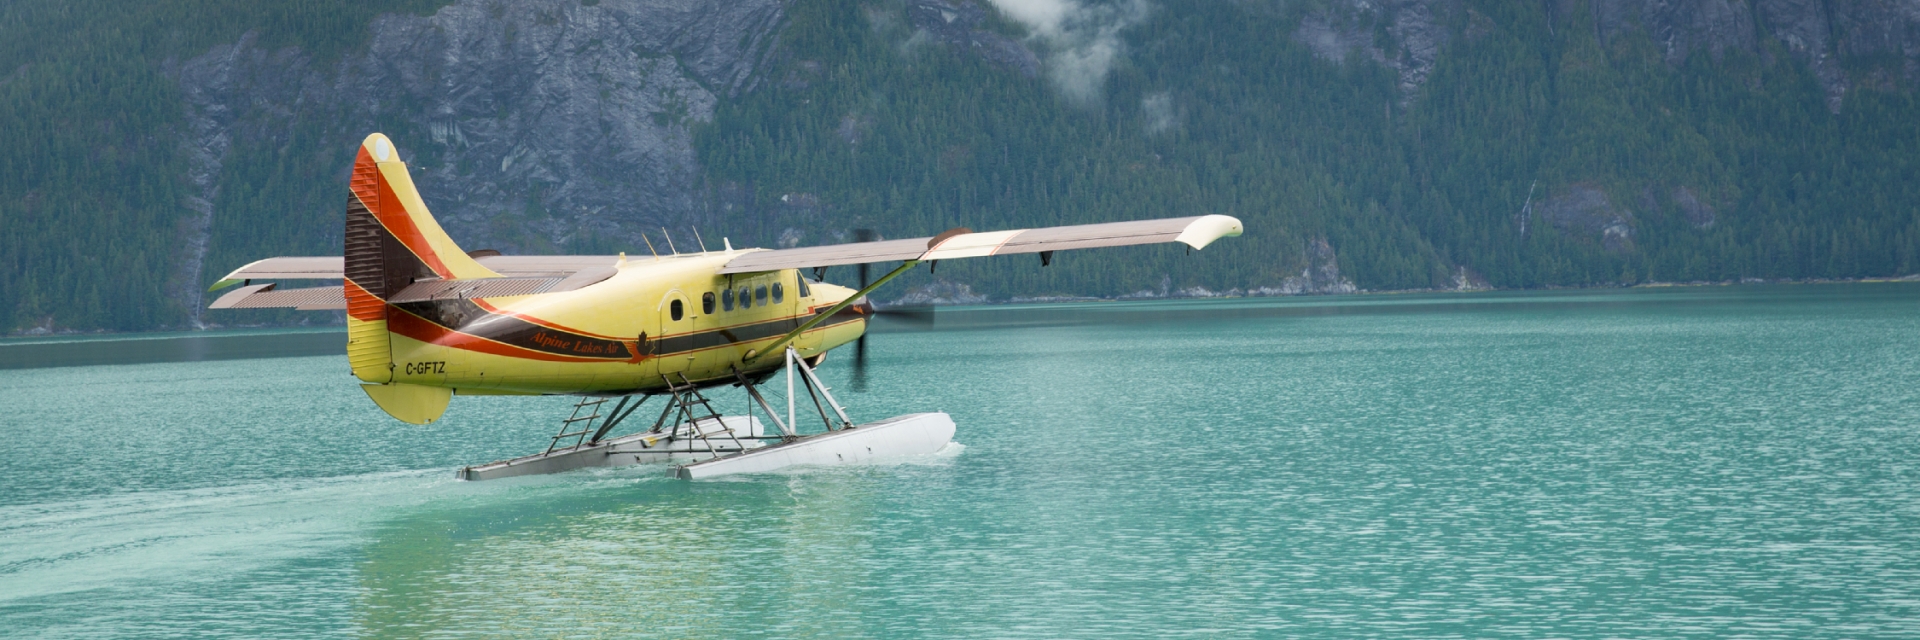 A float plane landed on the water near a mountain range